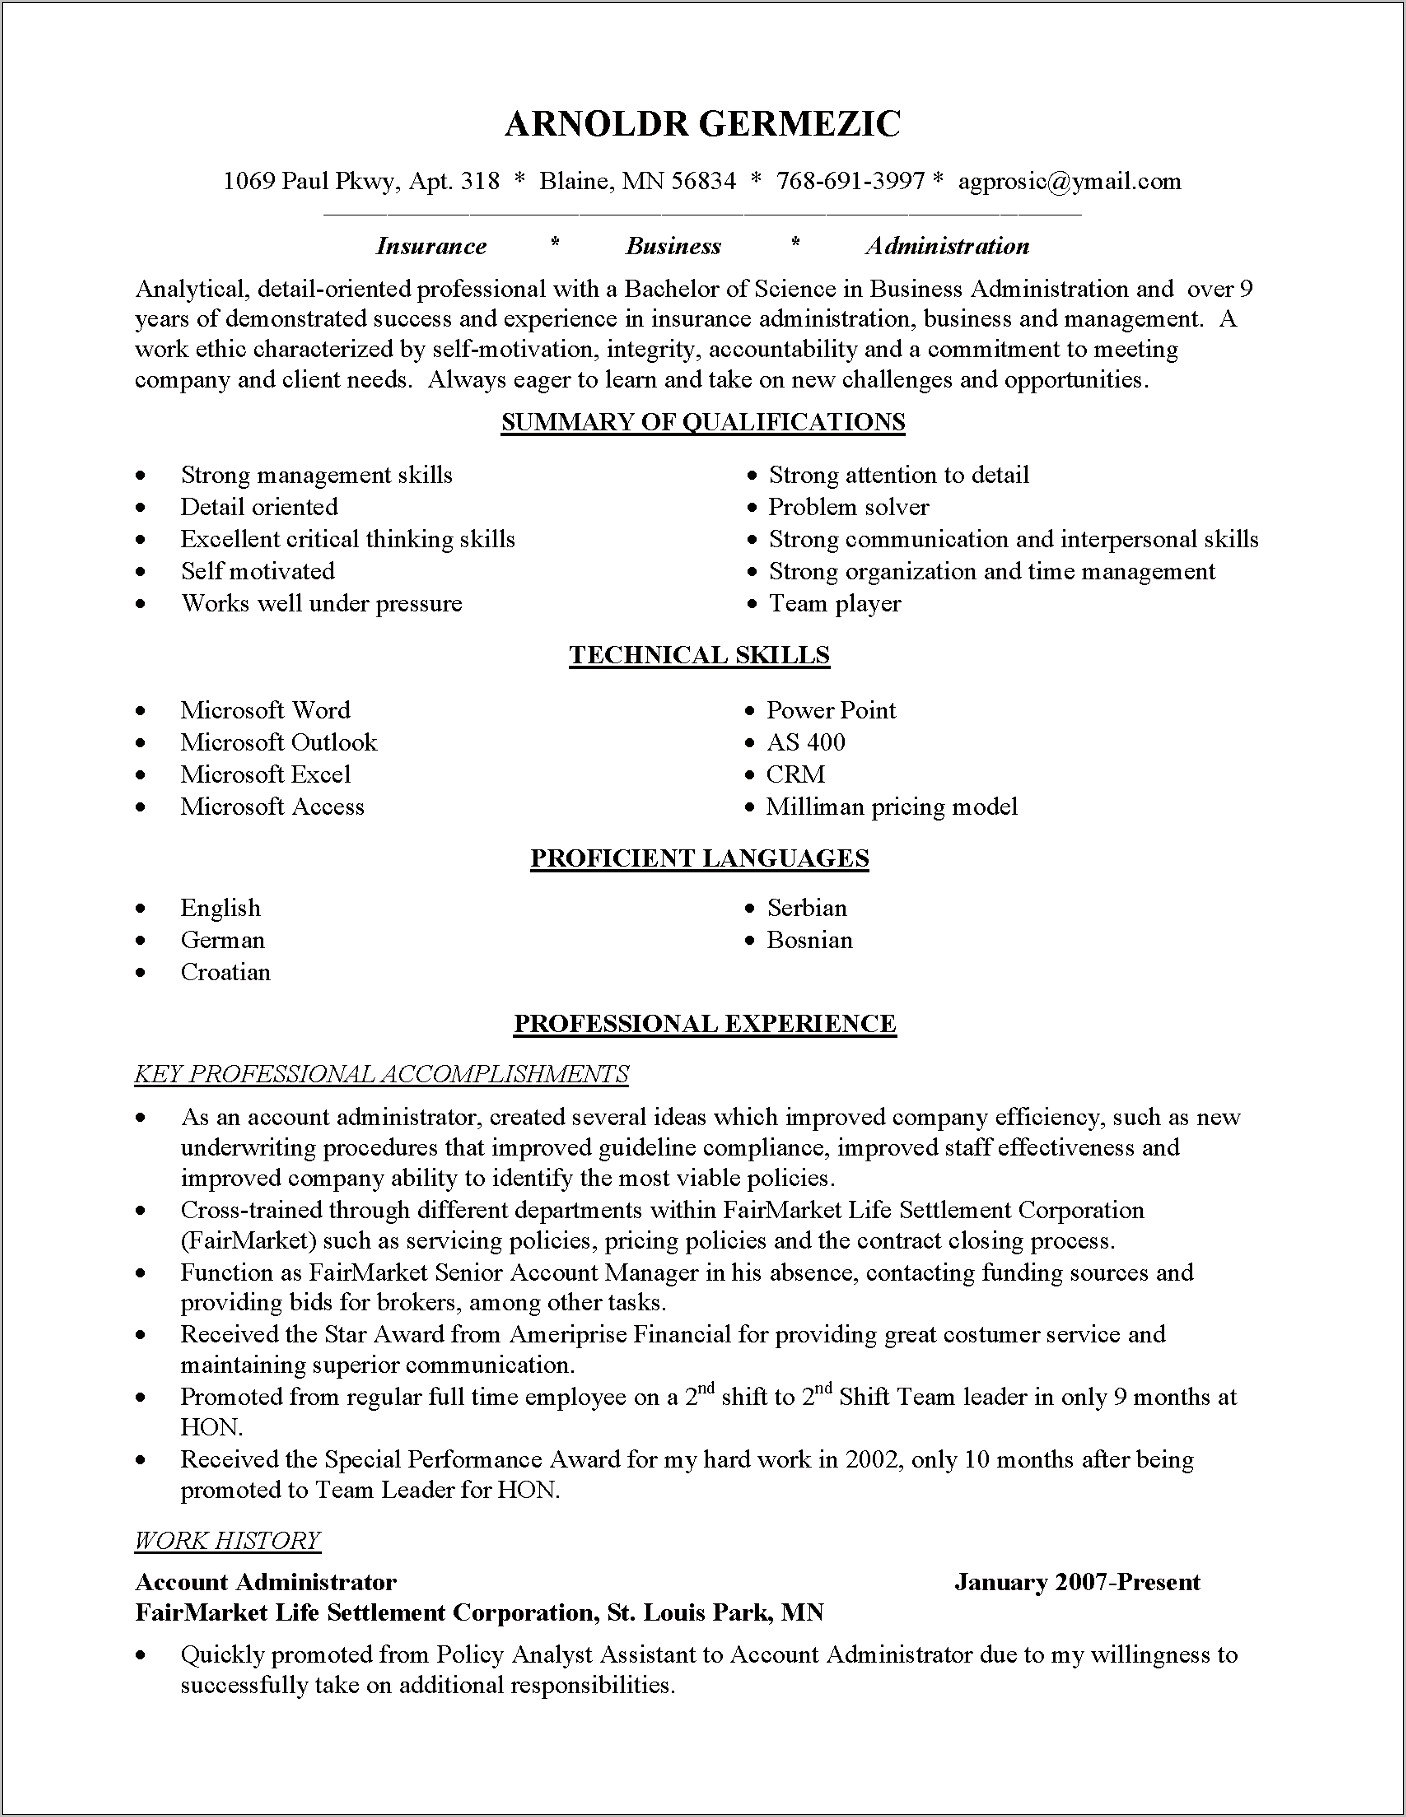 List Previous Work Experience Resume Career Change